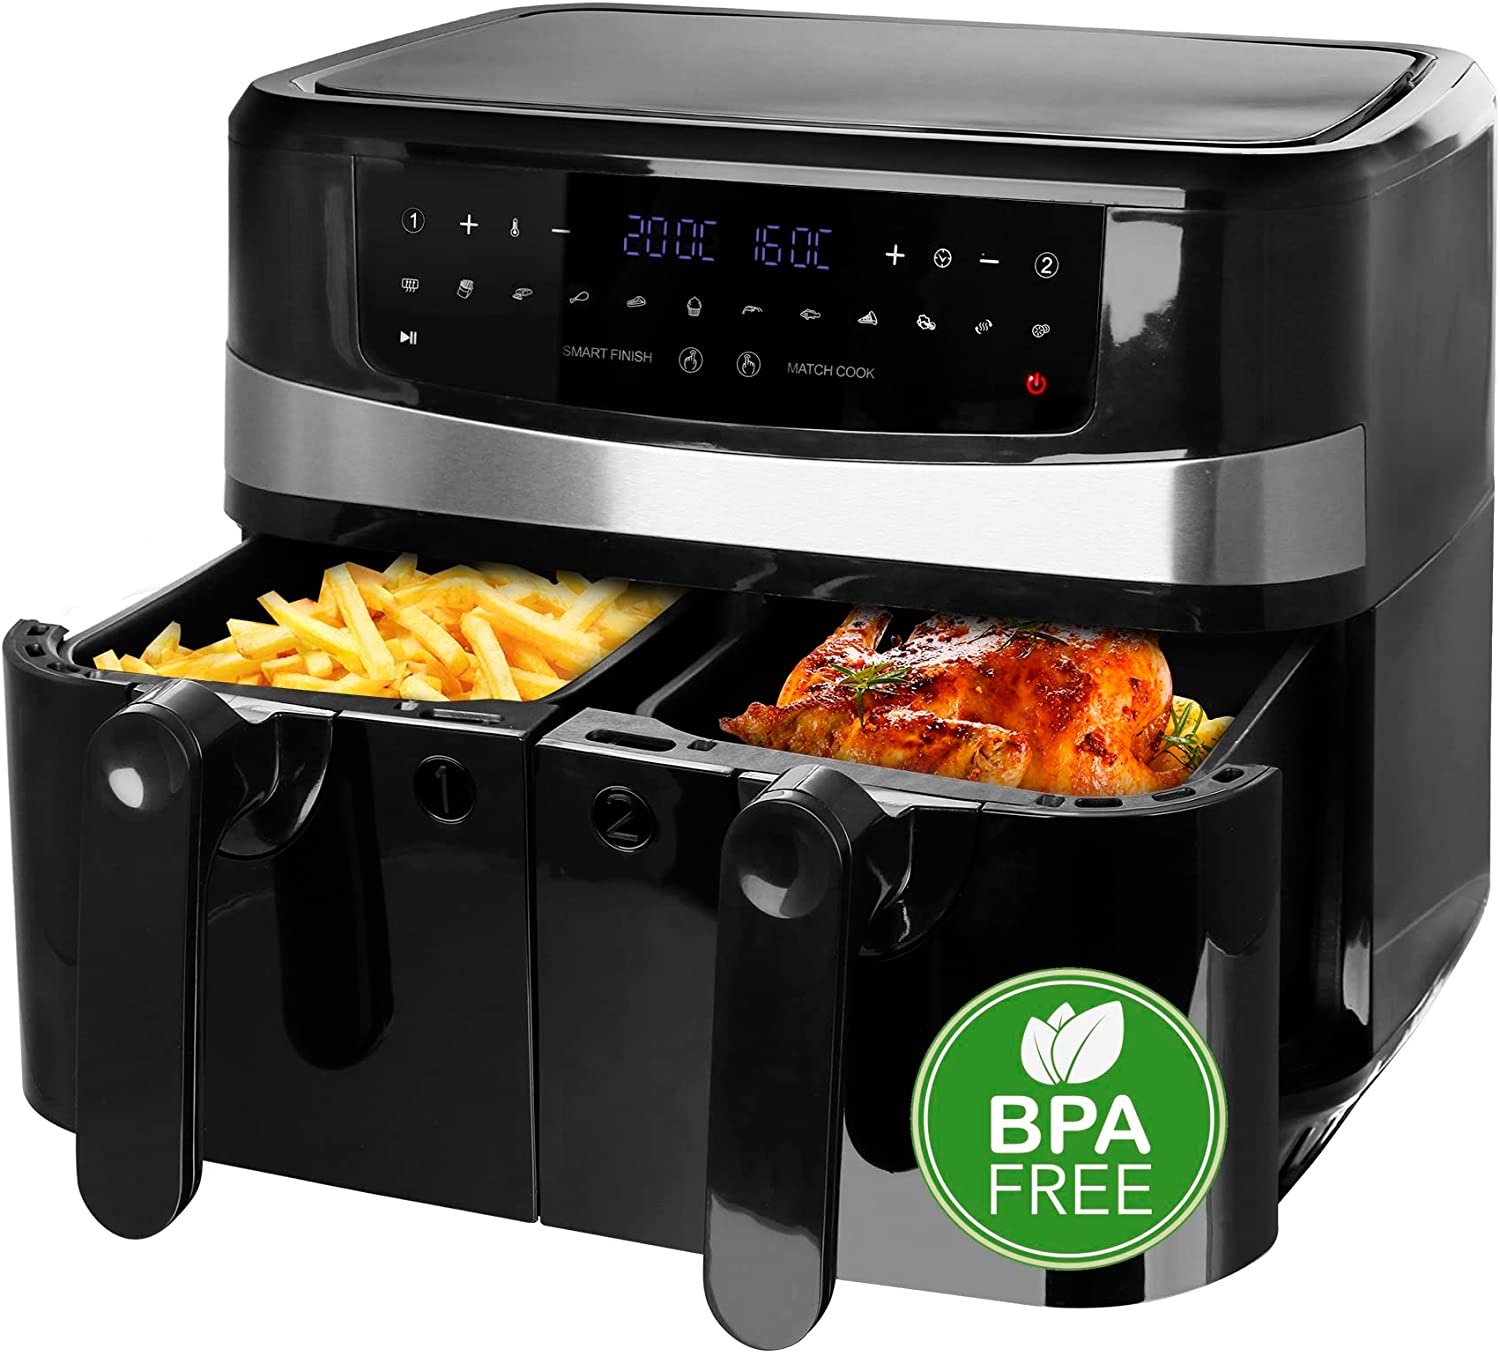 Emerio Double AF-126672 Digital Hot Air Frying With Hot Air Without Additional Oil 2 x 4.5 L Volume 12 Programs BPA Free Function (Both Ready) Black